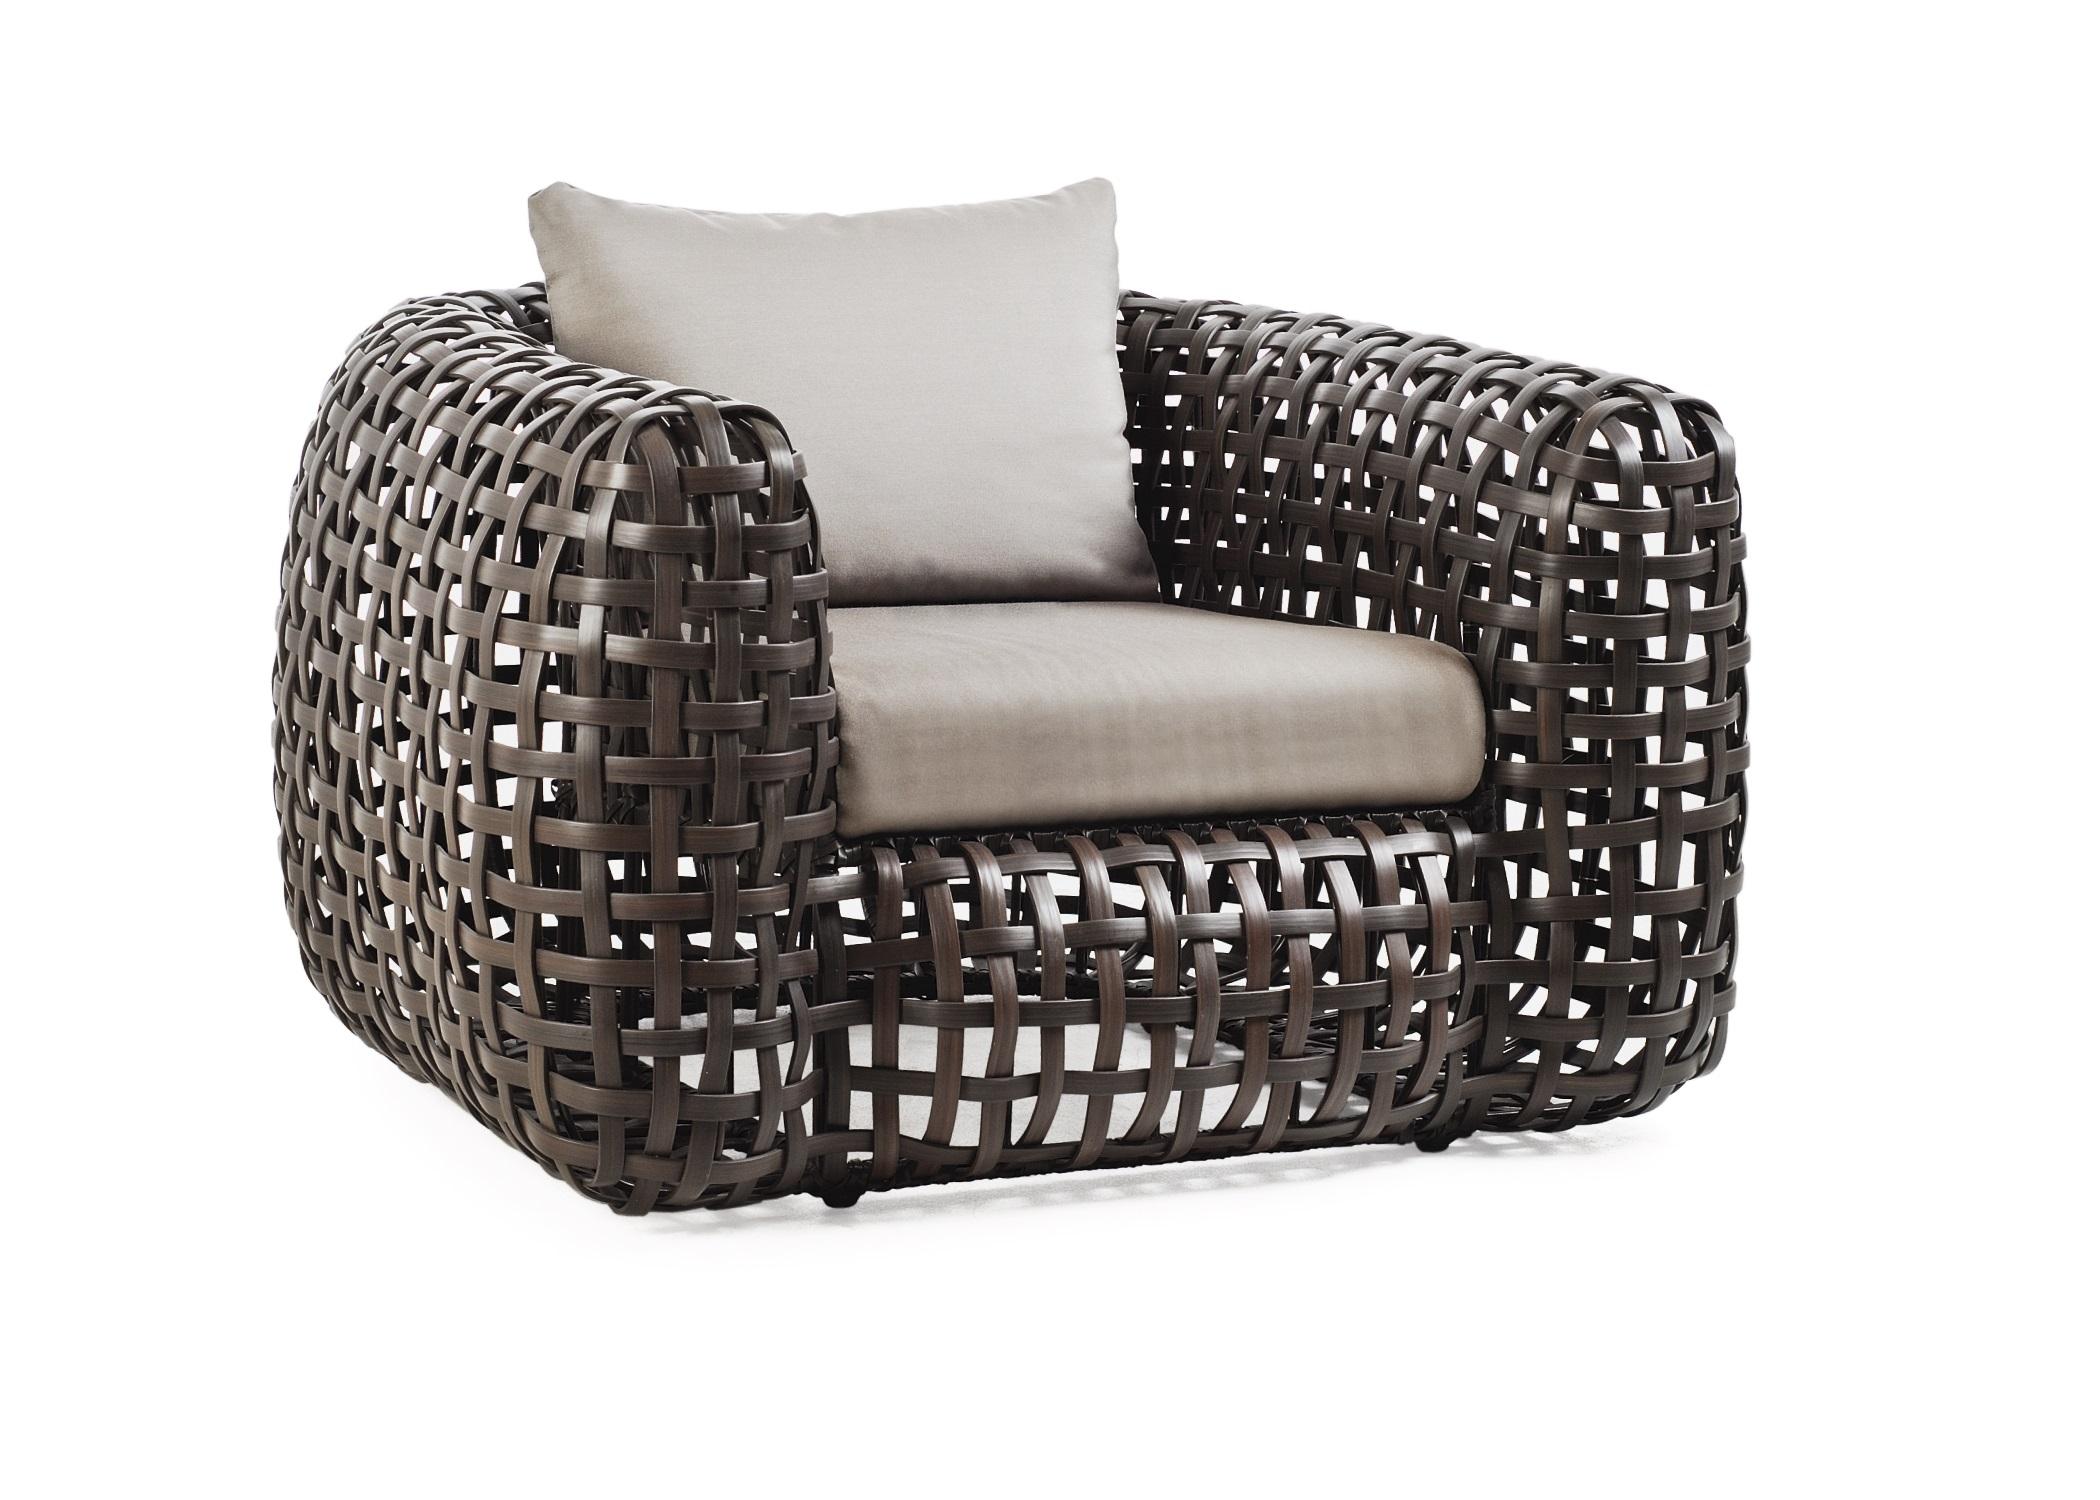 Indoor Matilda easy armchair by Kenneth Cobonpue.
Materials: Rattan.
Also available in other colors and for outdoors. 
Dimensions: 100cm x 110cm x H 63cm.

The same principle of a woven basket is used in making Matilda. This vast collection of